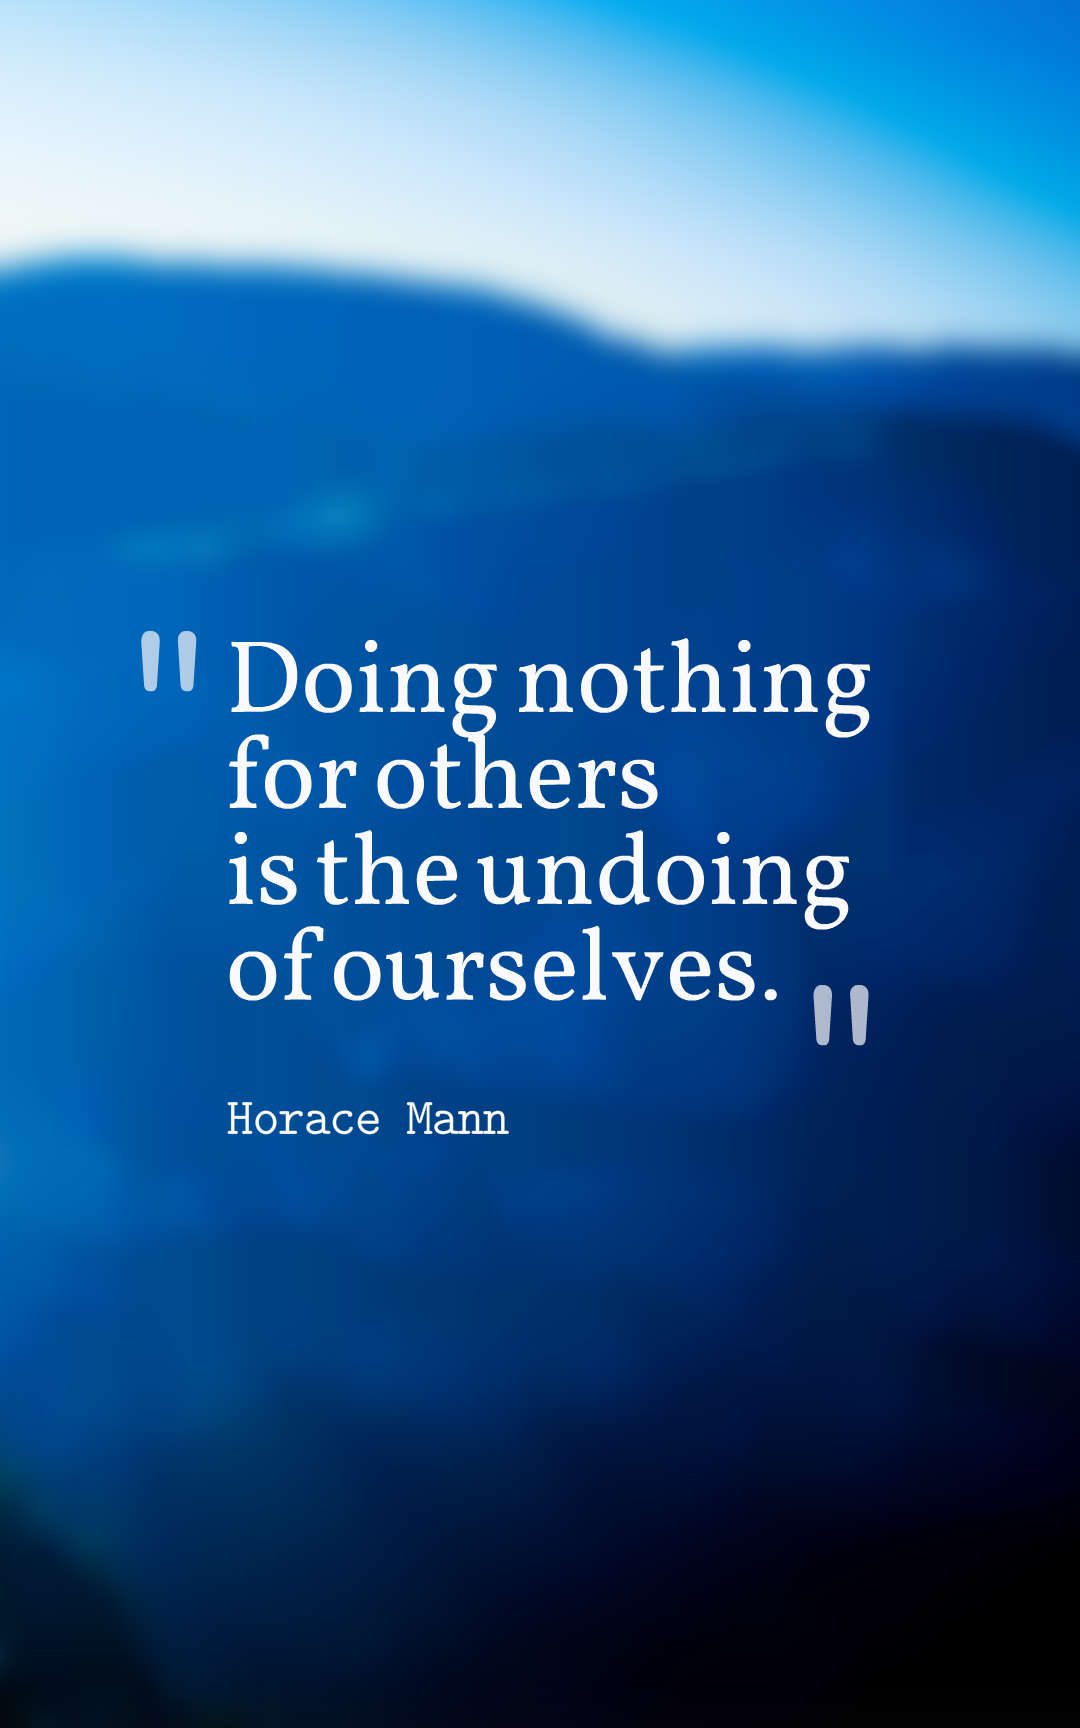 Doing nothing for others is the undoing of ourselves.